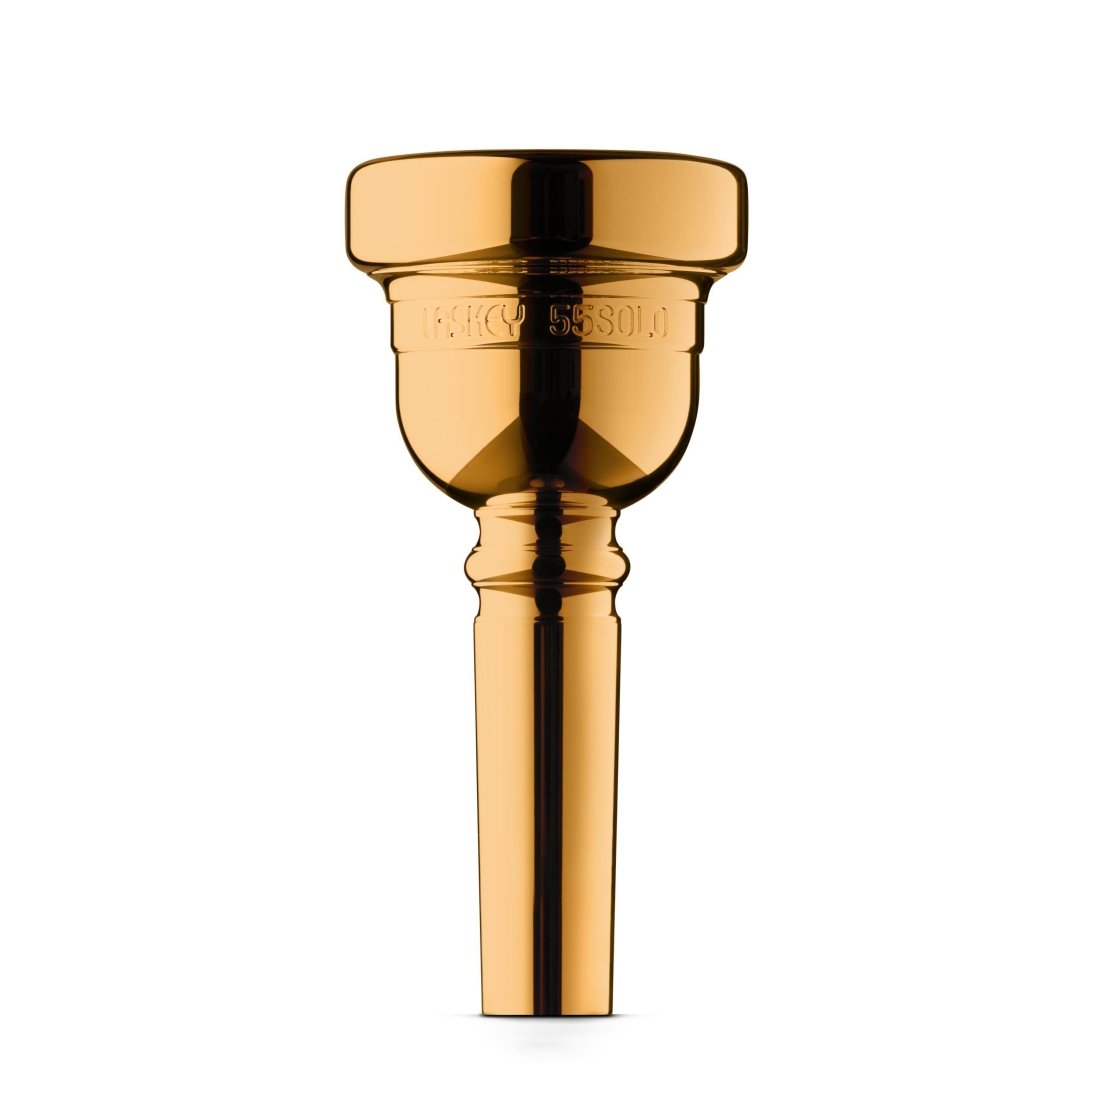 Alessi 55 SOLO Trombone Mouthpiece - Gold Plated